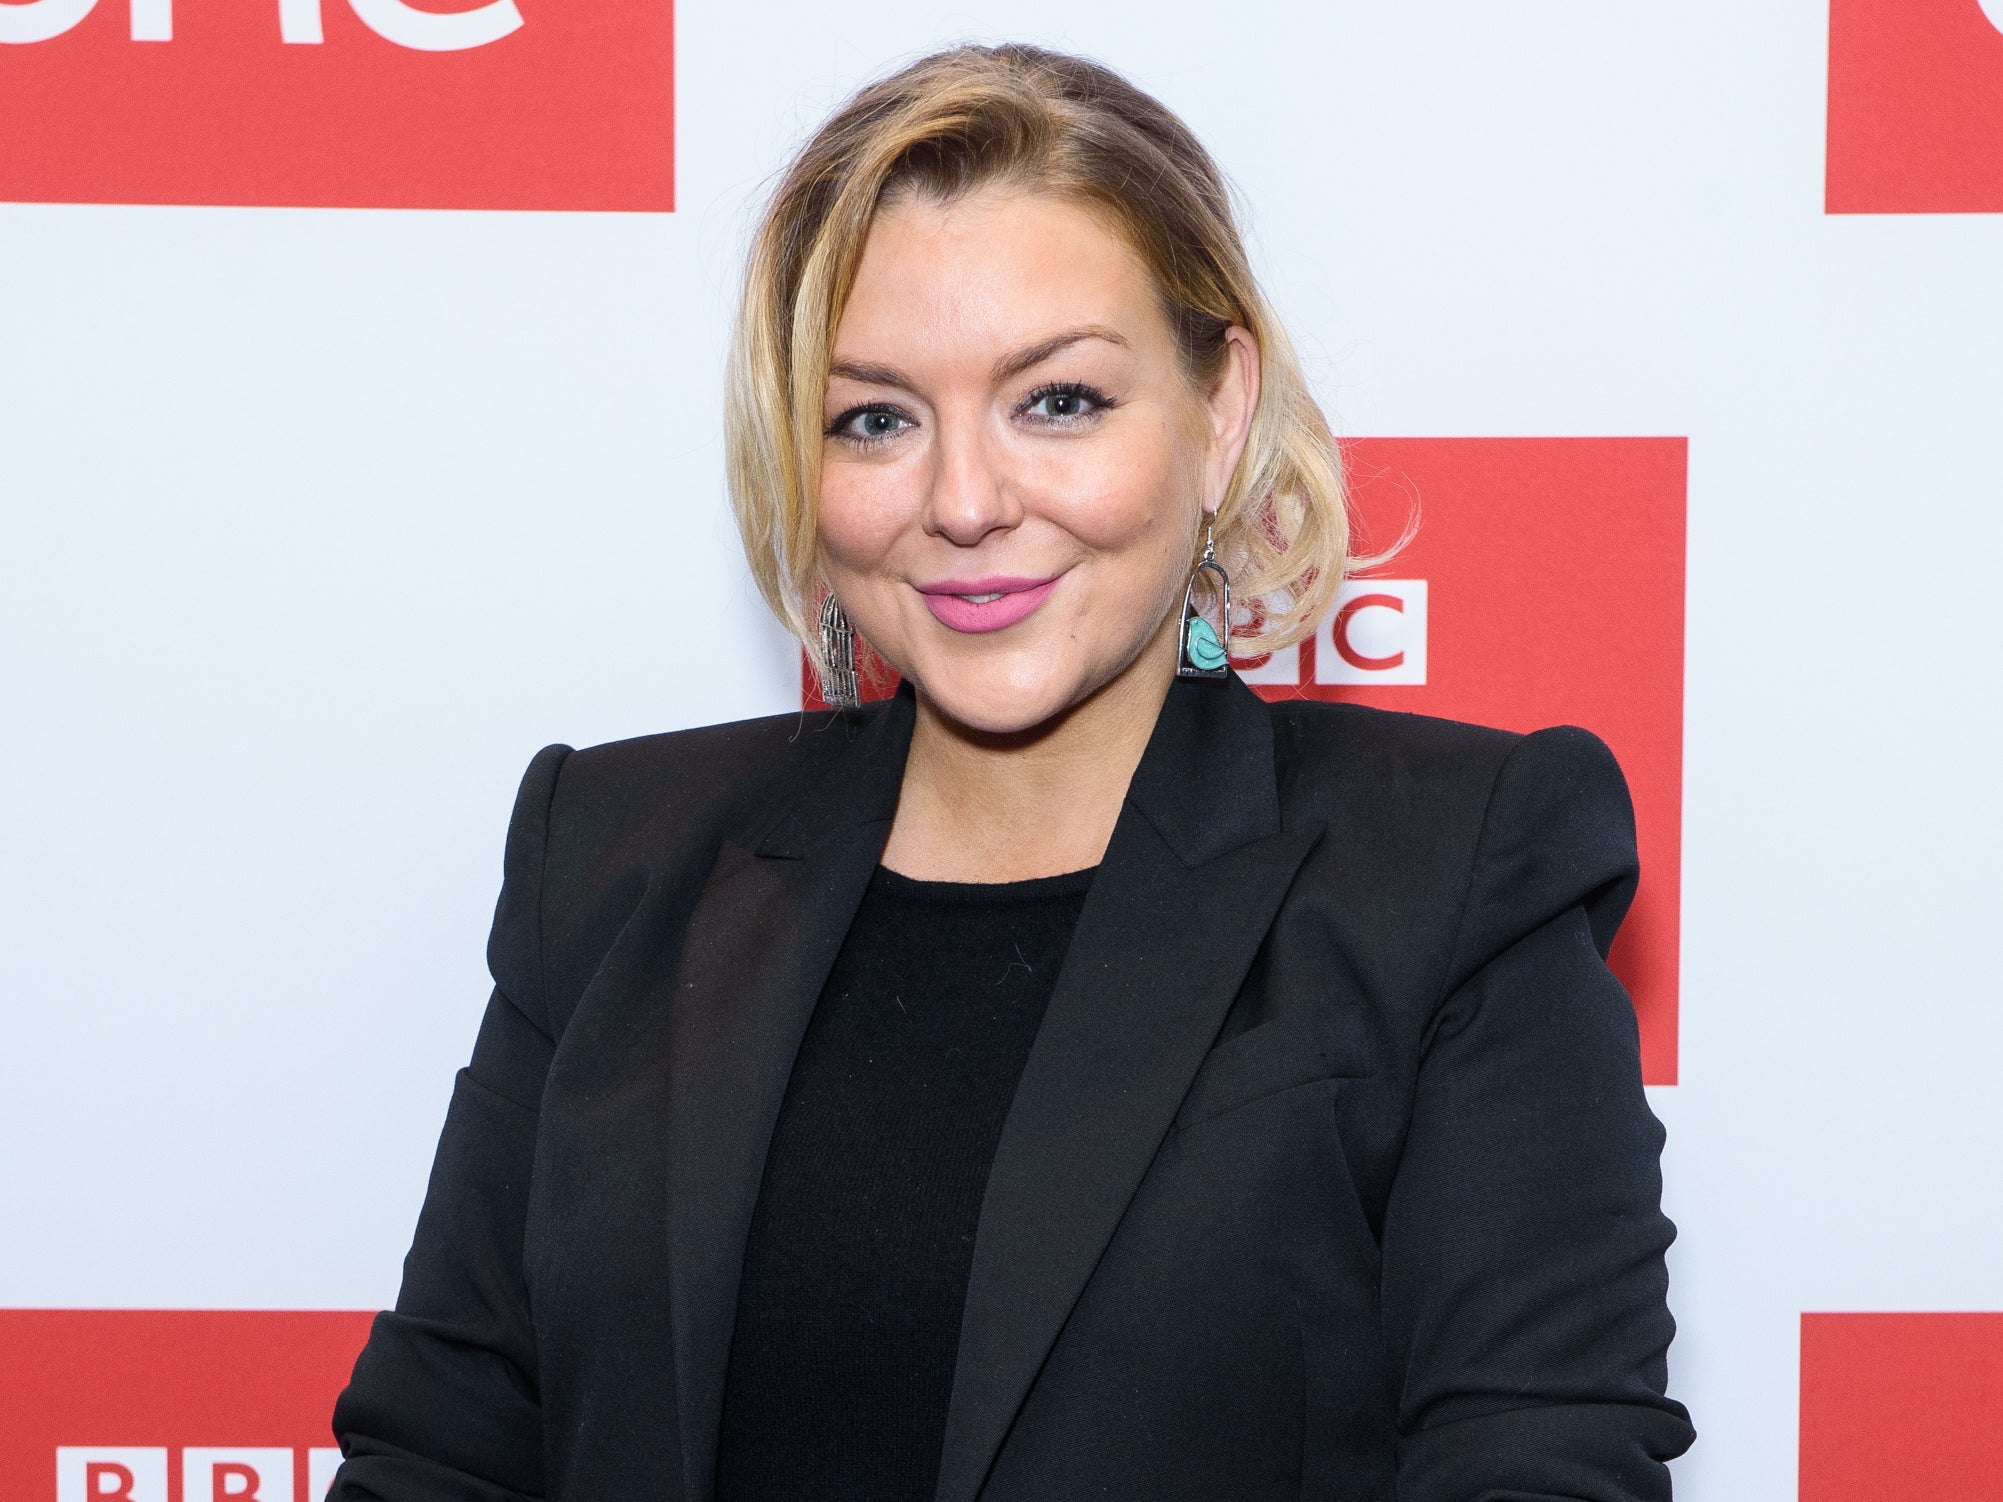 Sheridan Smith attends a photocall to launch the new BBC One drama “Care” at BAFTA on 27 November 2018